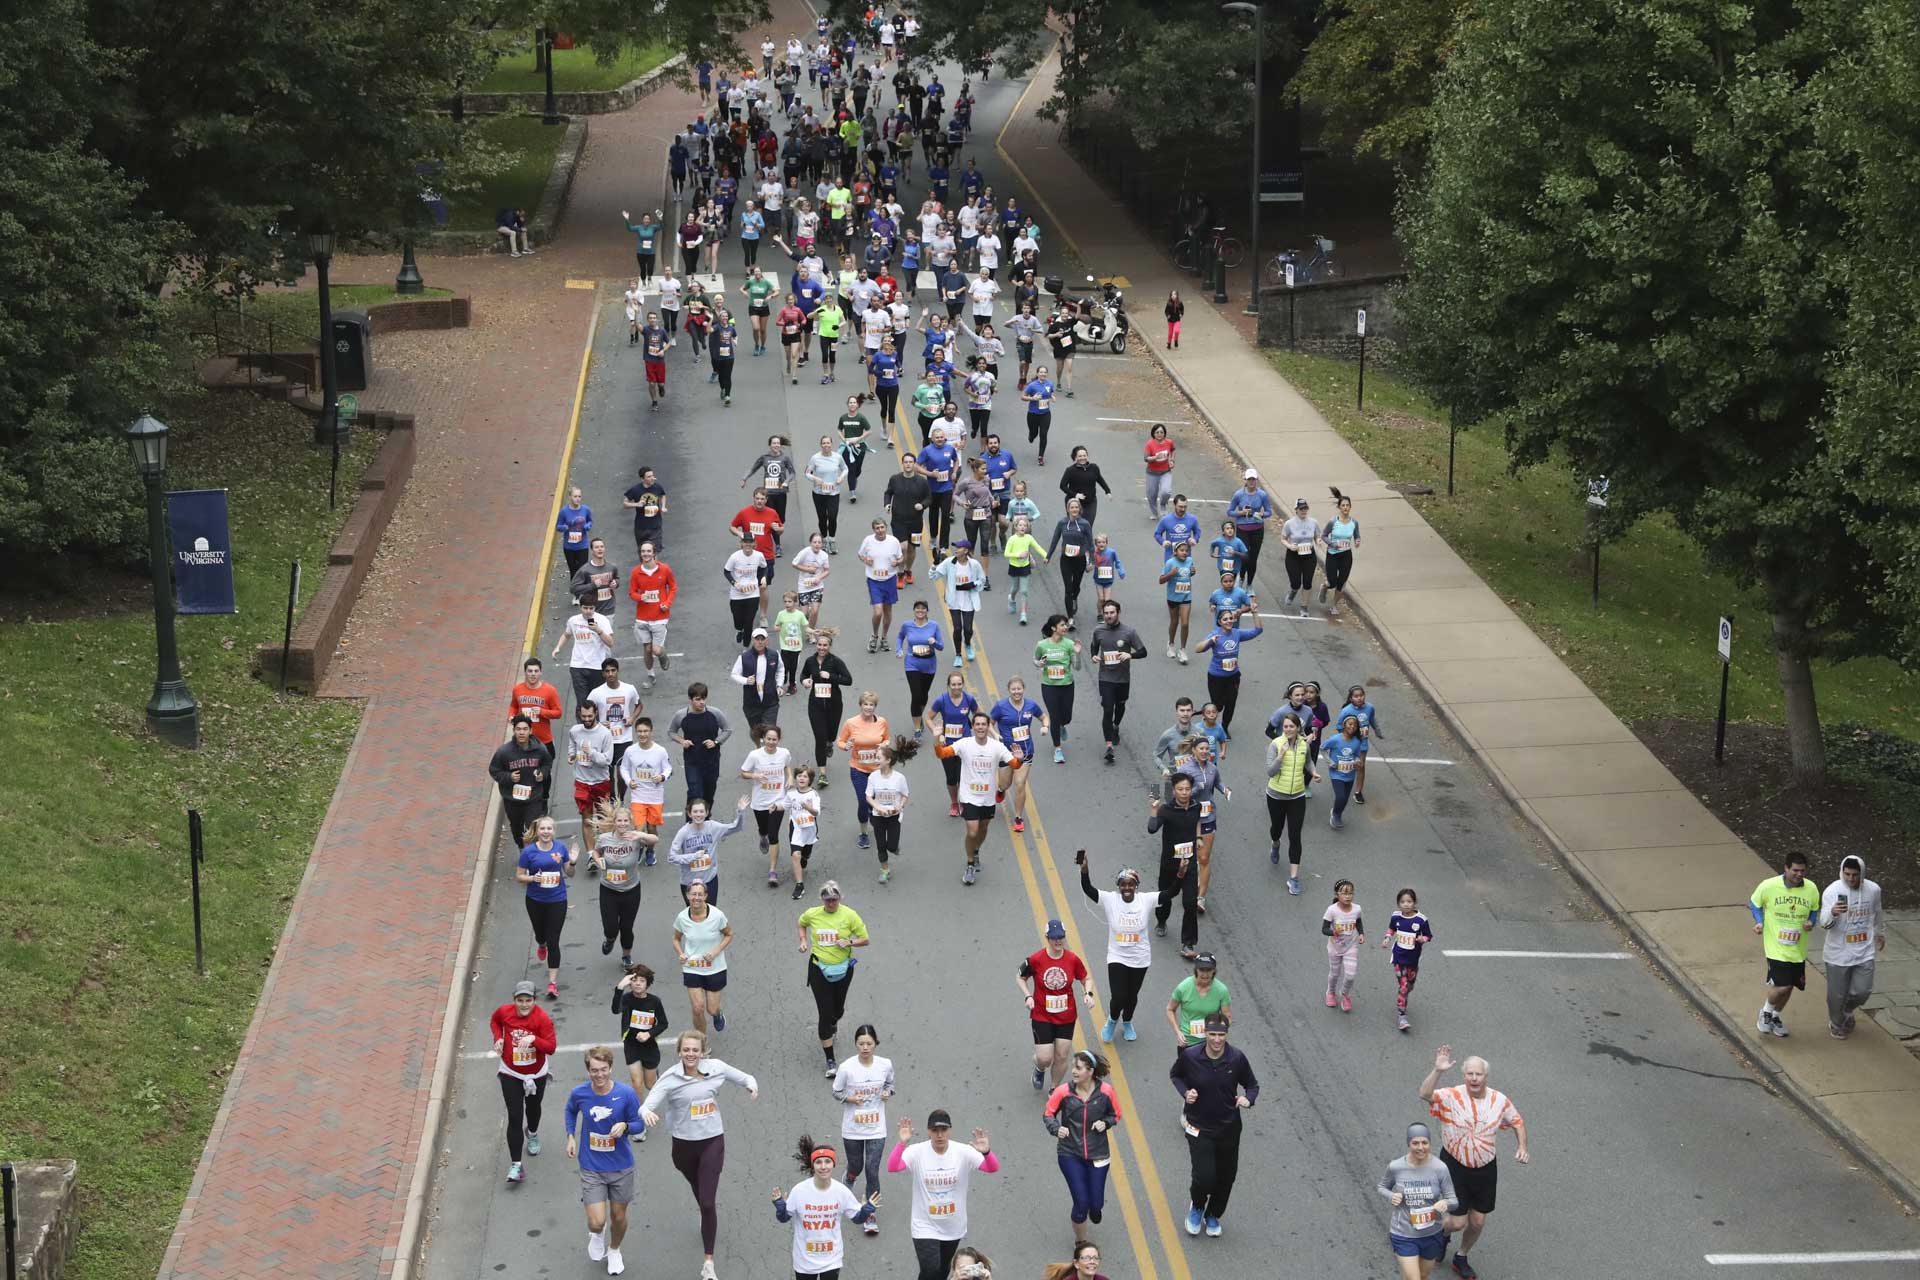  Aerial view of runners during the 5K